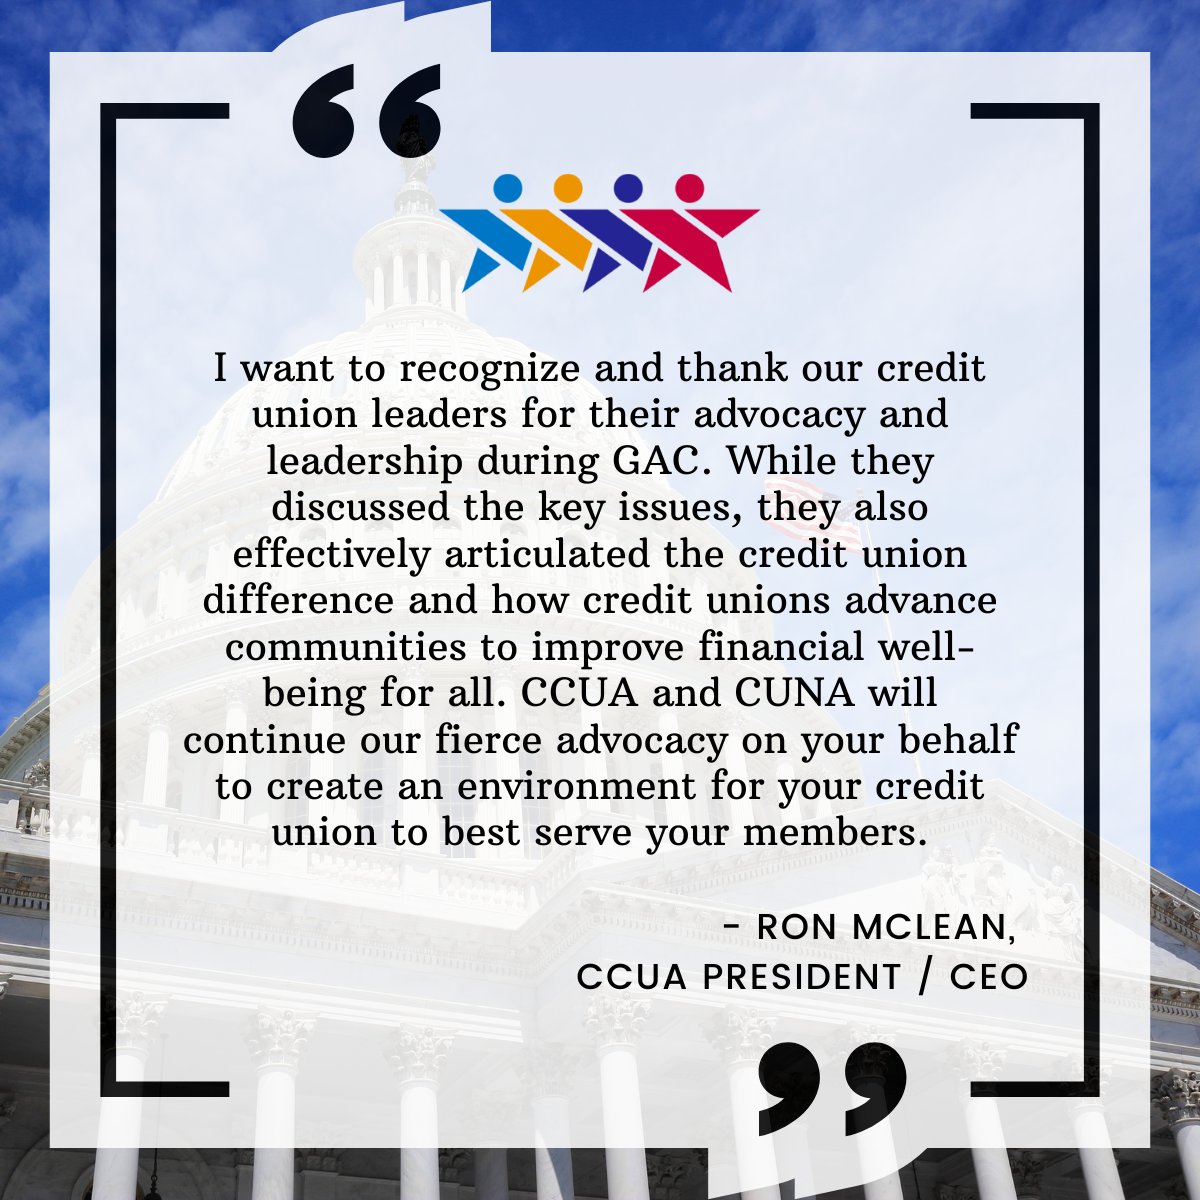 This week wrapped up another successful #CUNAGAC! This year over 130 #CCUA member #creditunions attended the annual gathering. Leaders spent time advocating with the congressional delegation across our four states. 

#governmentaffairs #peoplehelpingpeople #credituniondifference